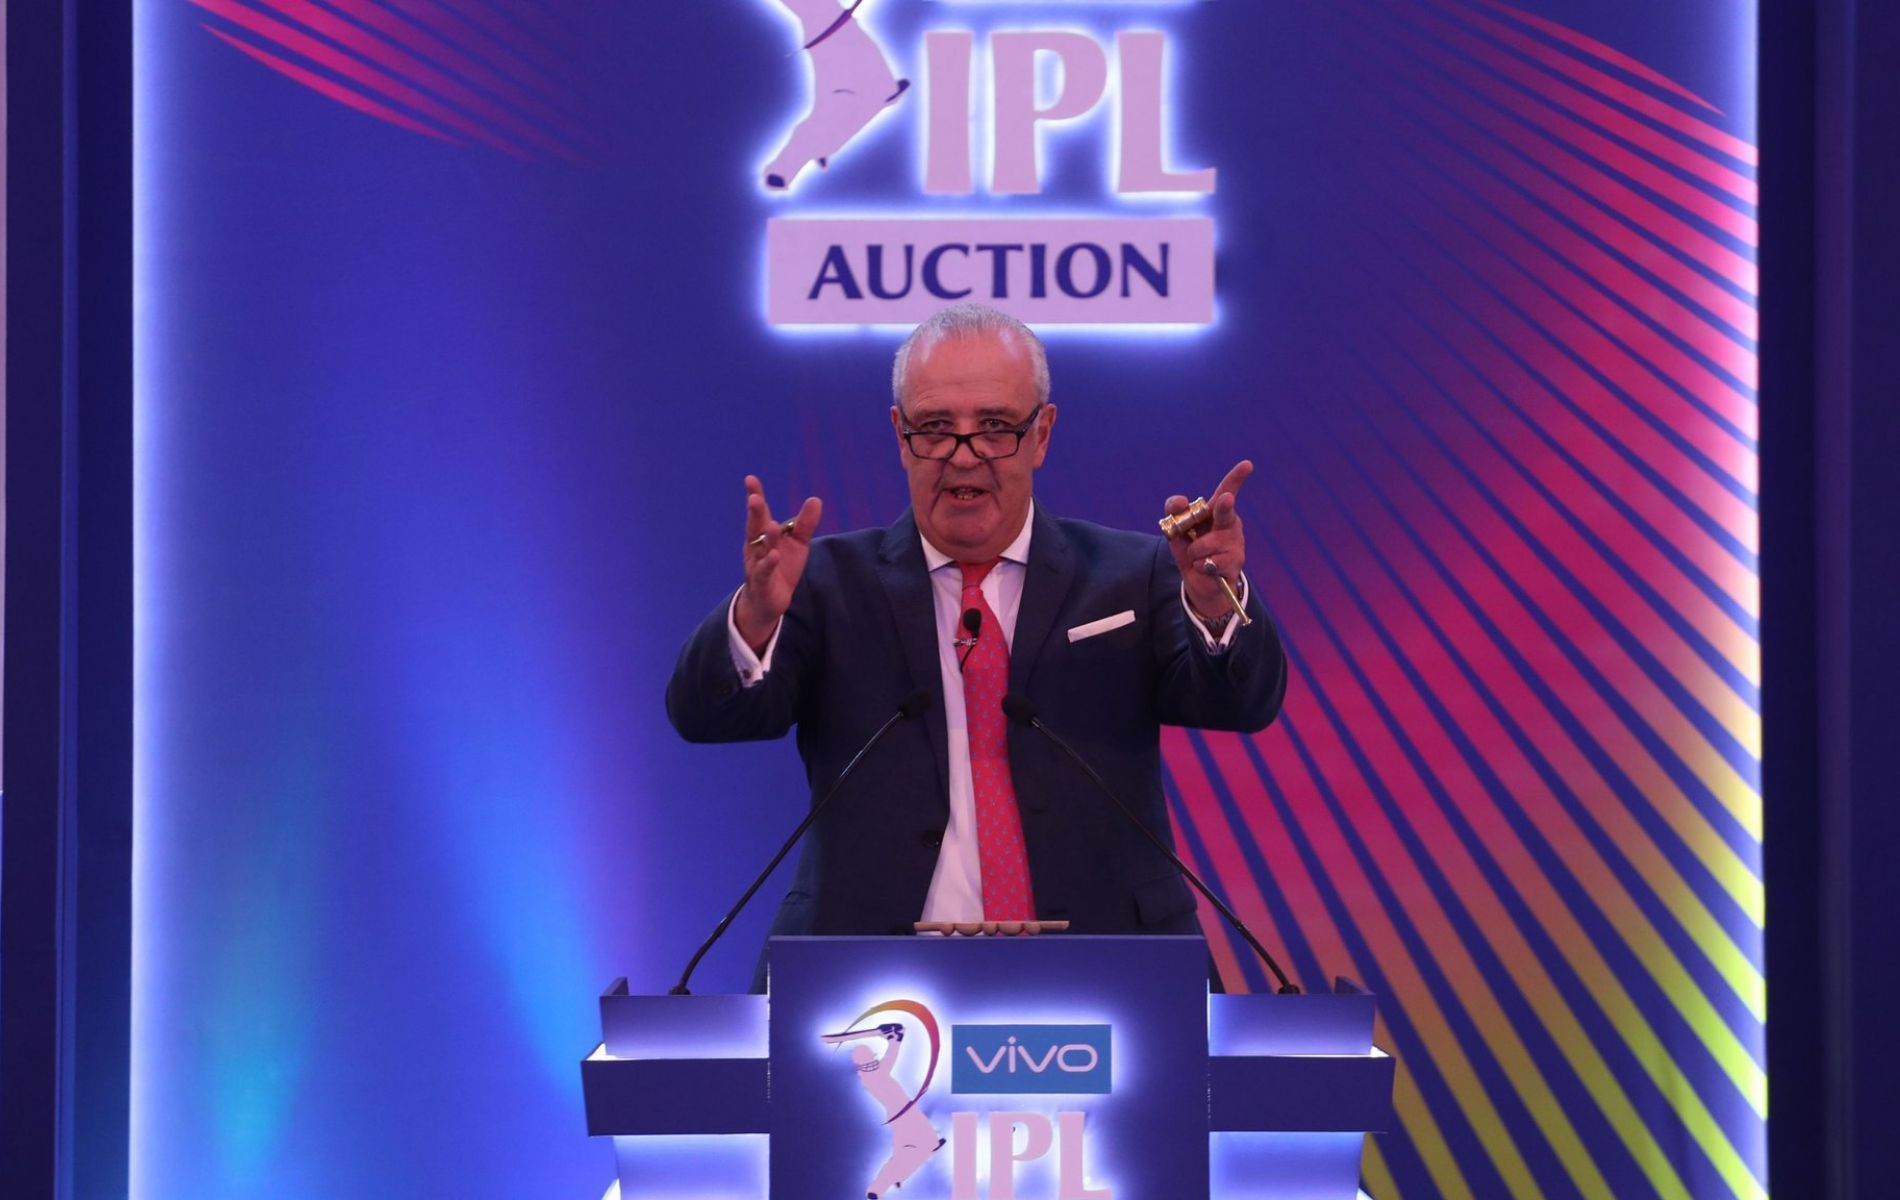 Hugh Edmeades collapsed on stage during the IPL 2022 auction.